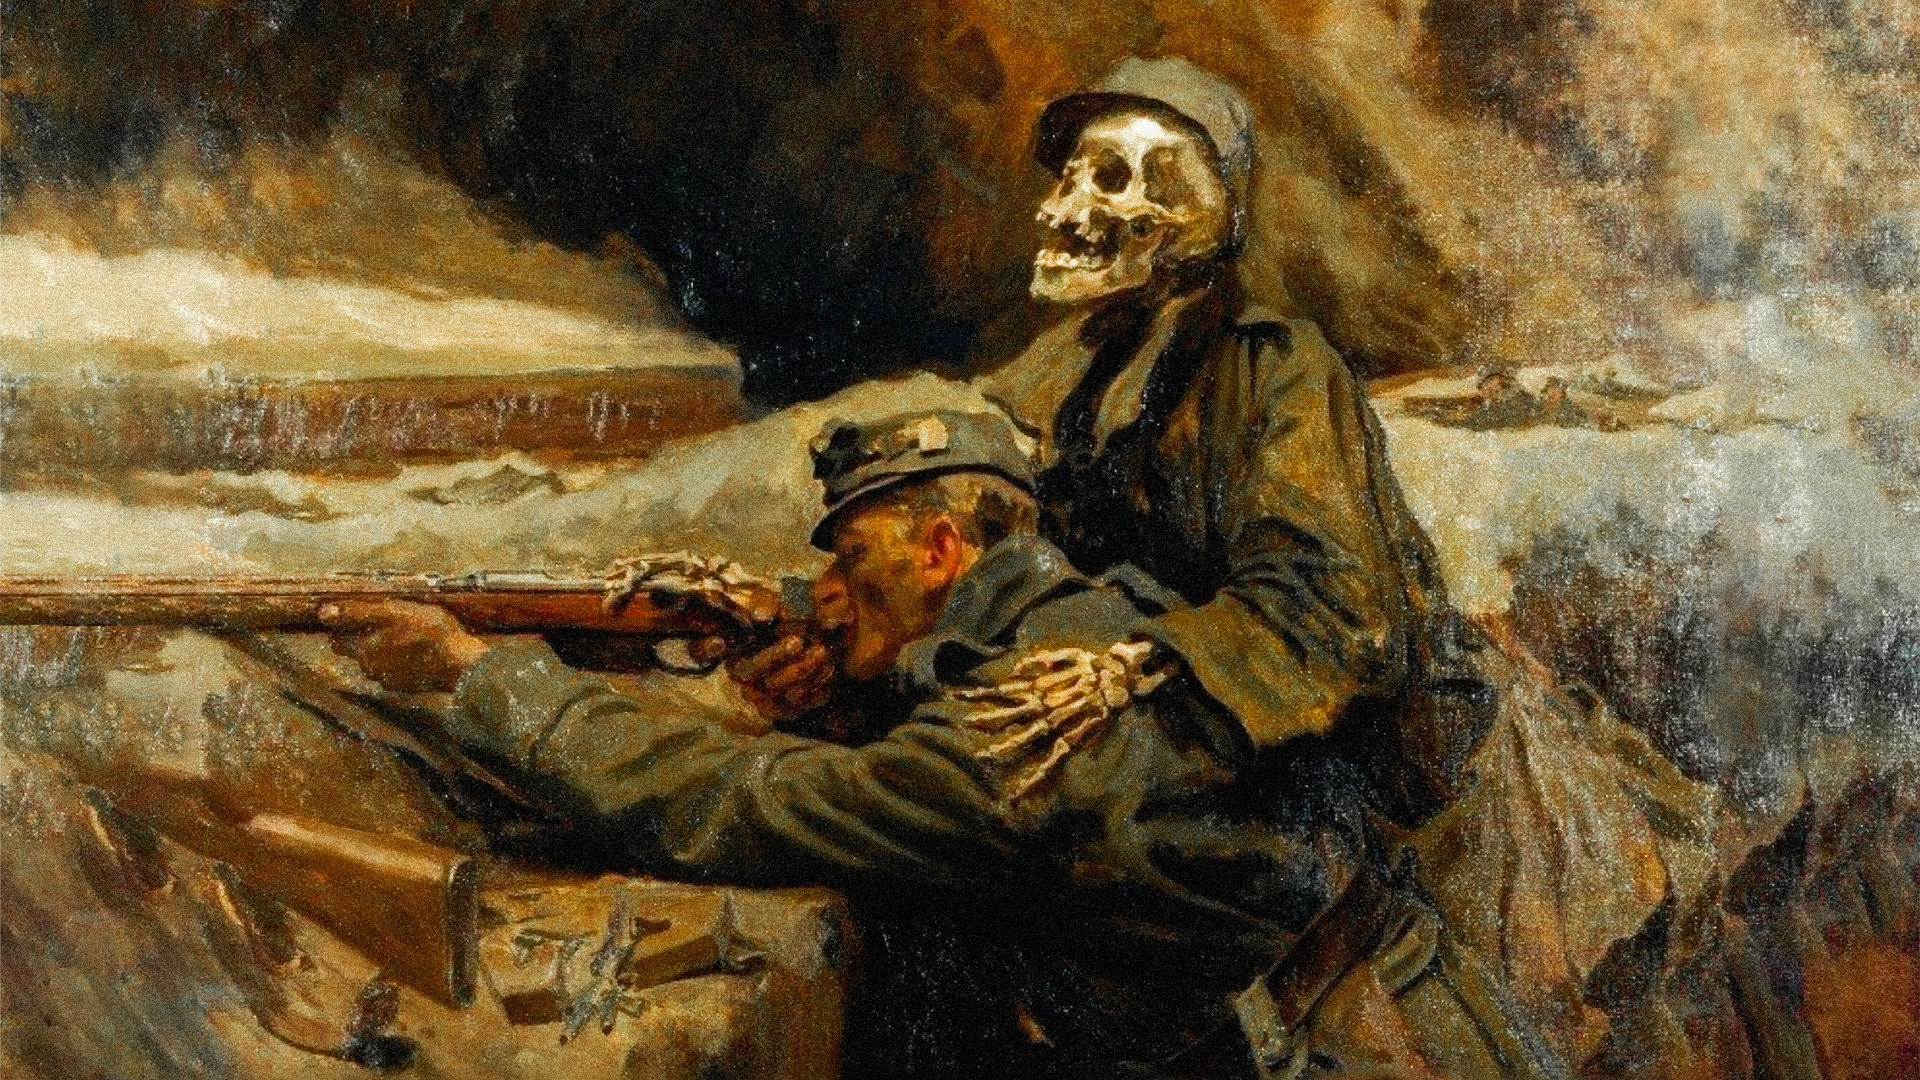 General 1920x1080 painting soldier war death skull skeleton rifles gun boys with guns aiming men with hats hat weapon